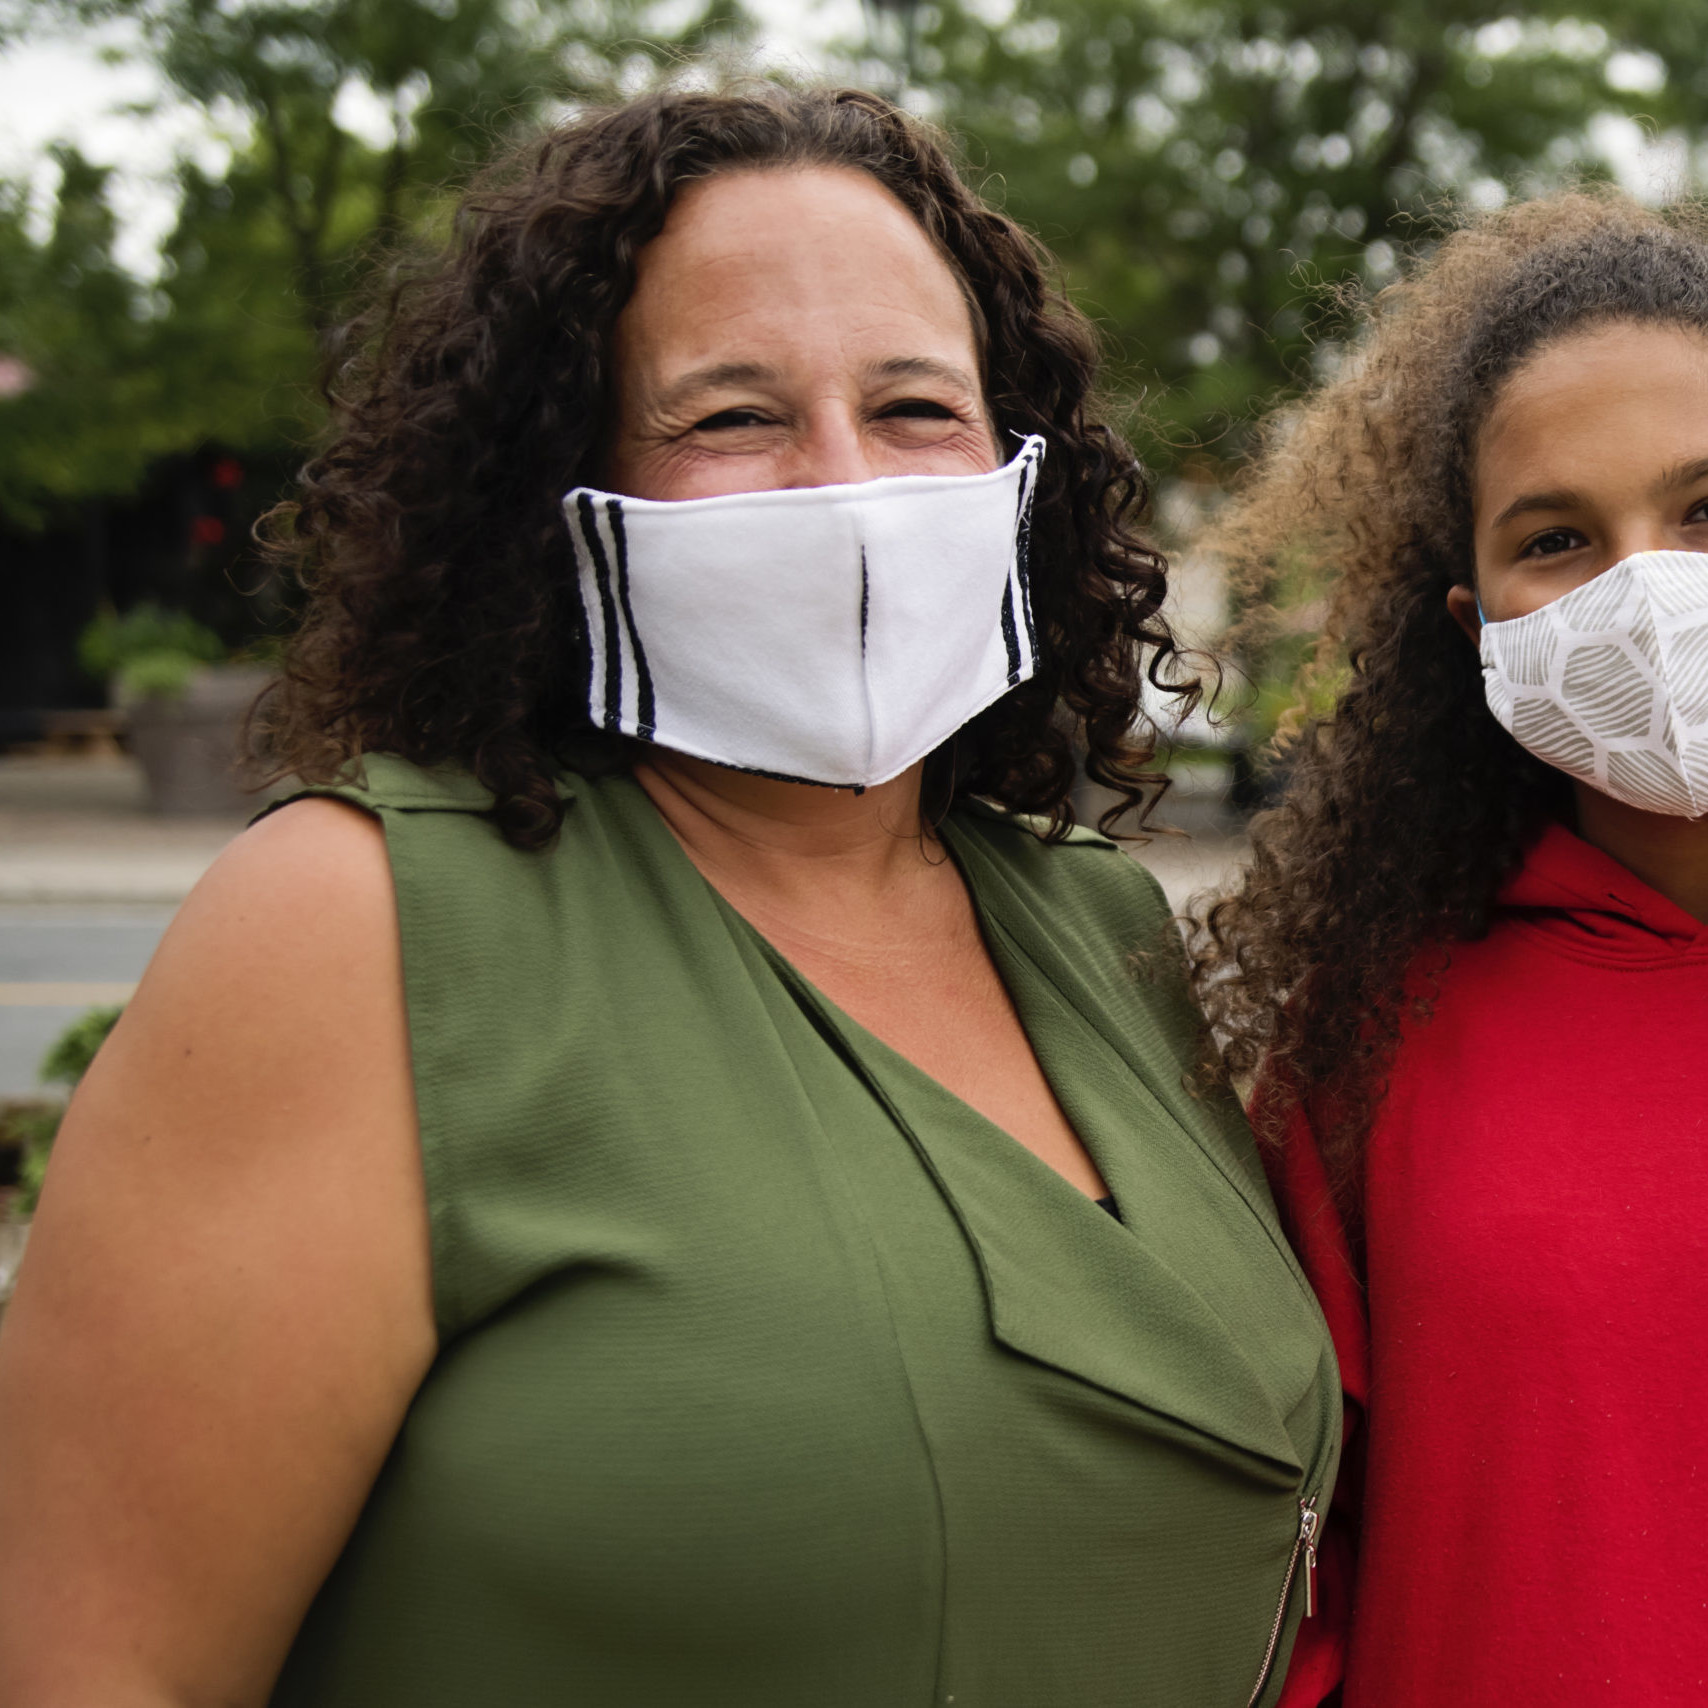 Mature mother and teenage mixed-race daughter wearing protective face mask before entering a store in small city street. Both have very curly brown hair. Horizontal waist up outdoors shot with copy space.